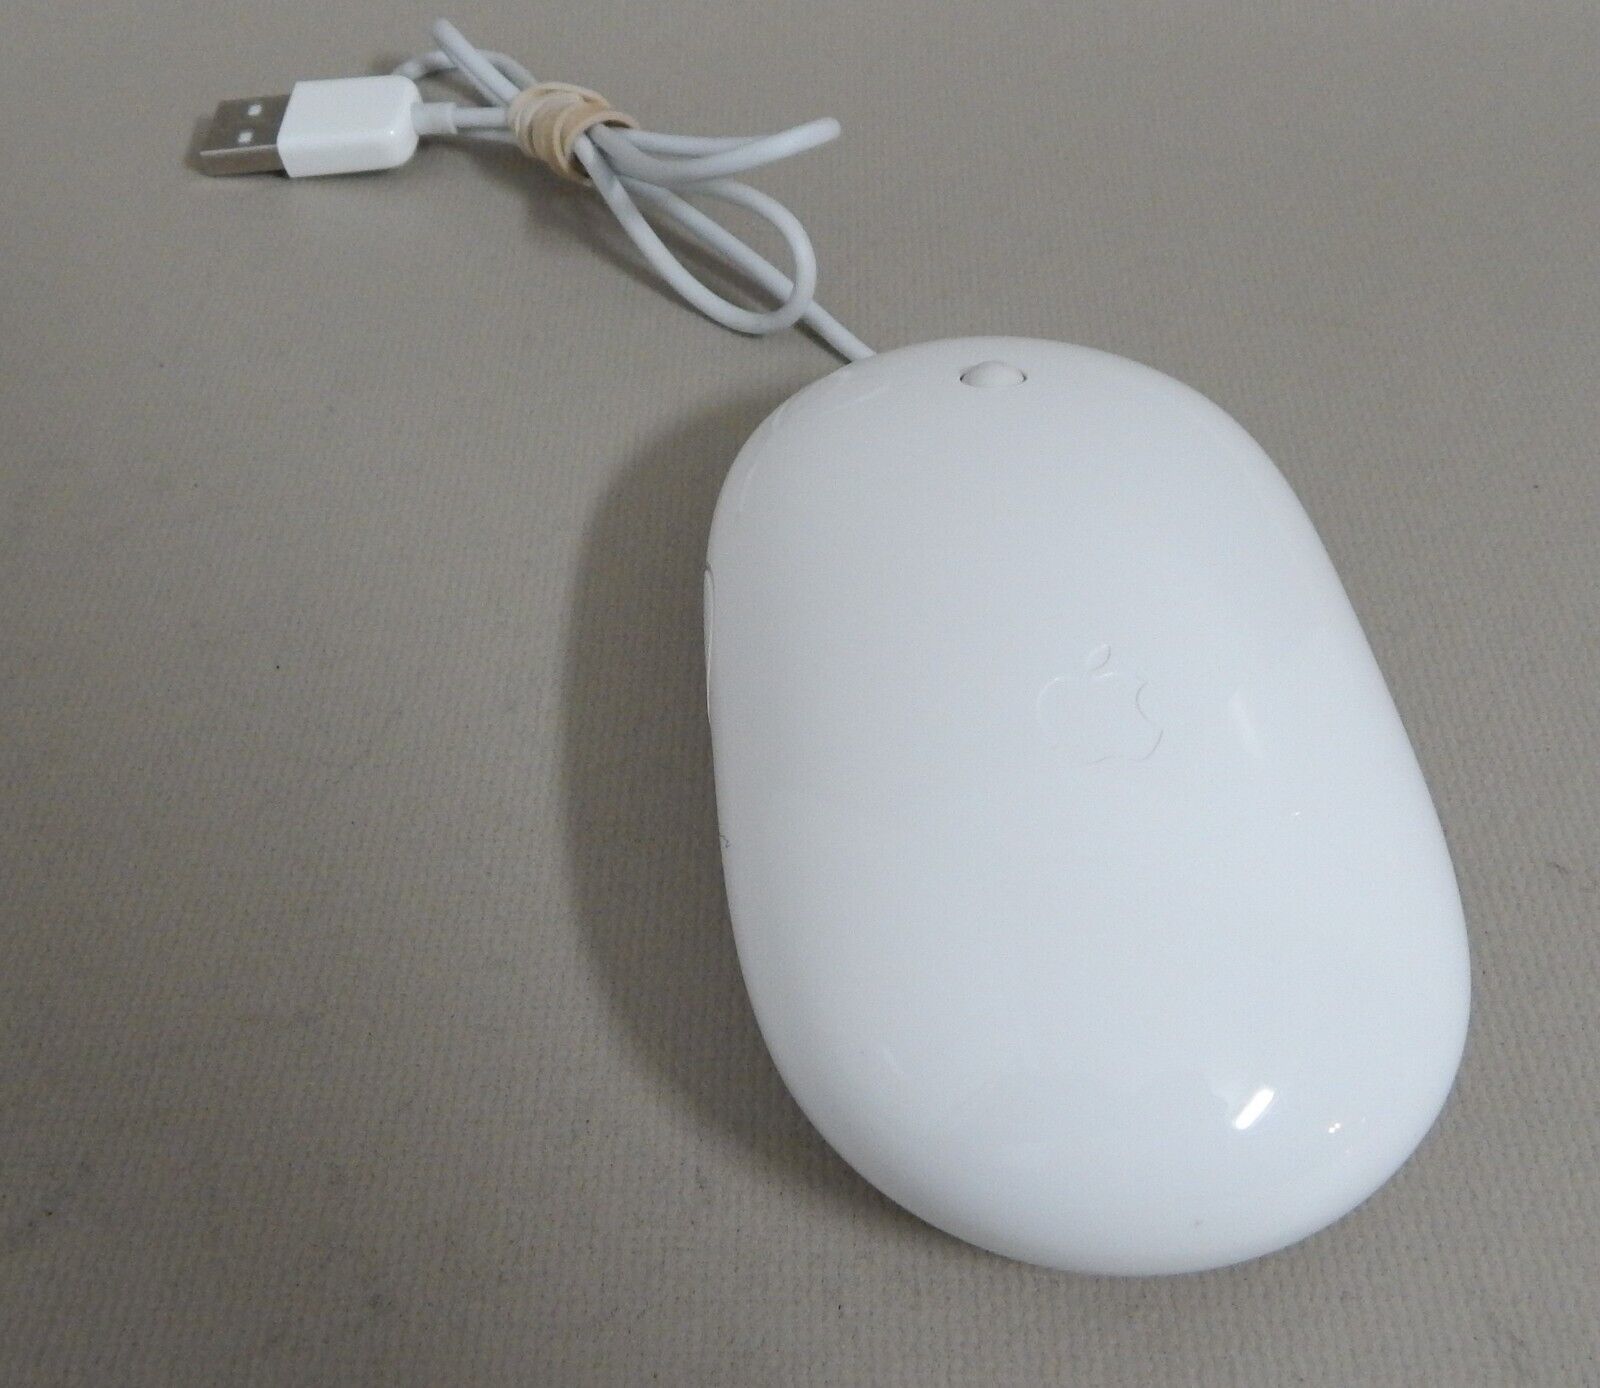 Authentic Apple Mighty Mouse Wired USB White Model No A1152 Tested